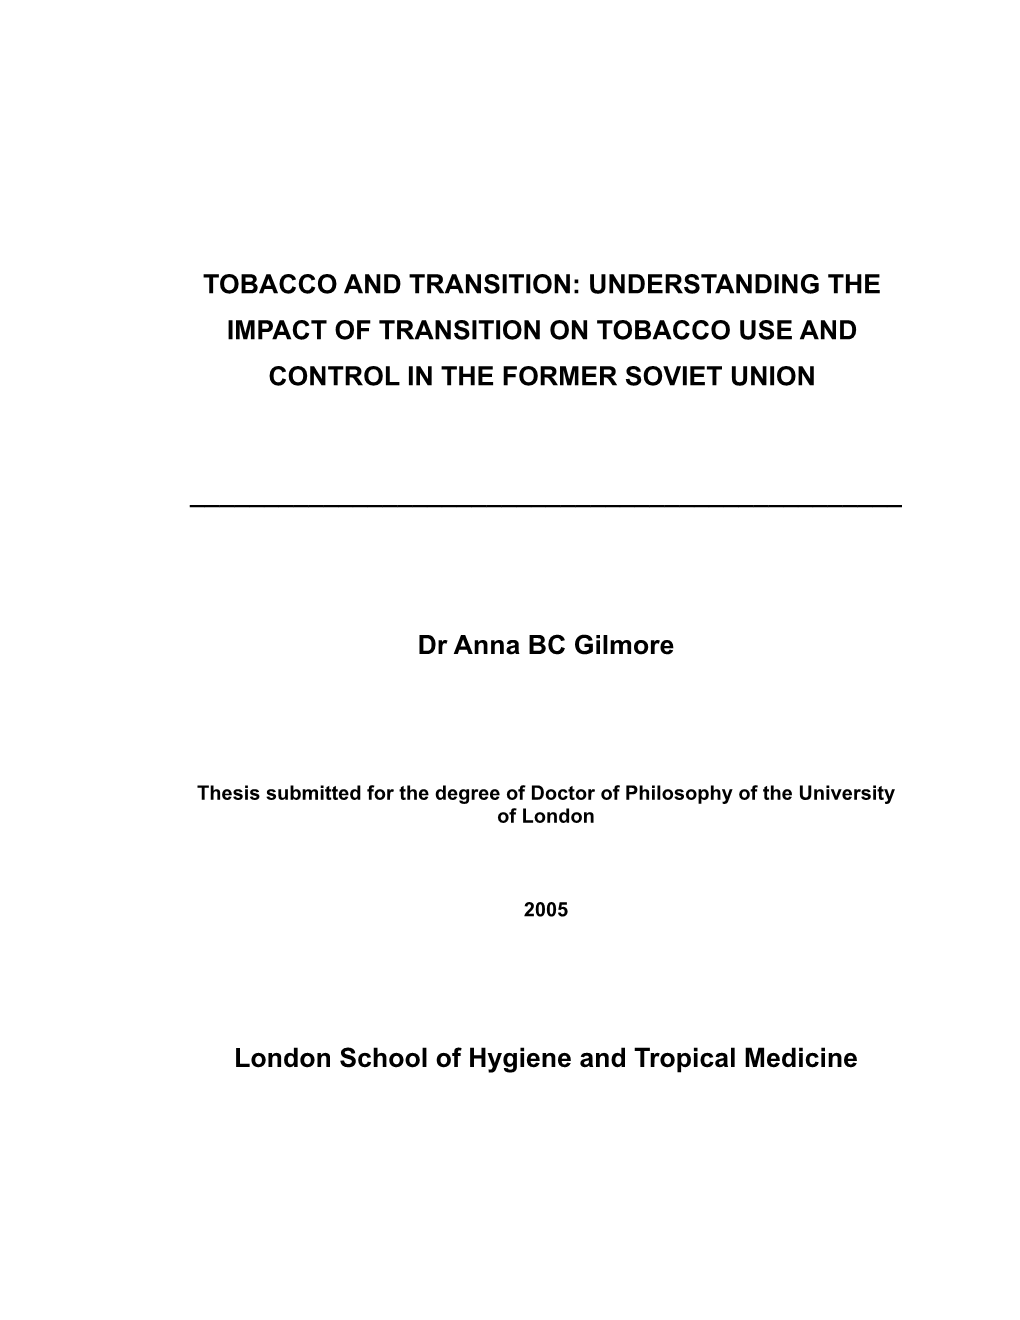 Tobacco and Transition: Understanding the Impact of Transition on Tobacco Use and Control in the Former Soviet Union